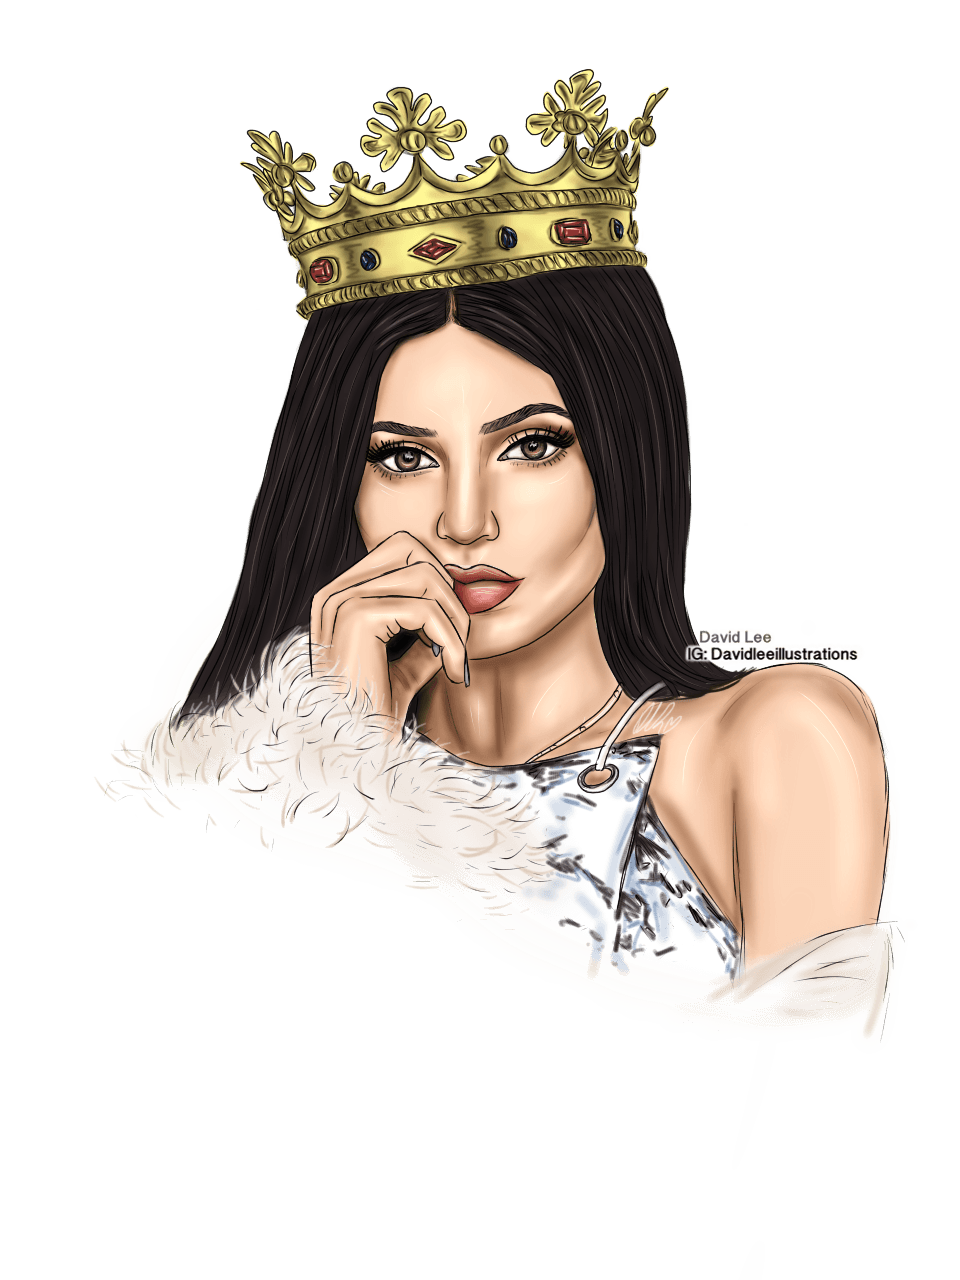 Kylie Jenner Wallpapers - Wallpaper Cave - 960 x 1280 png 212kB